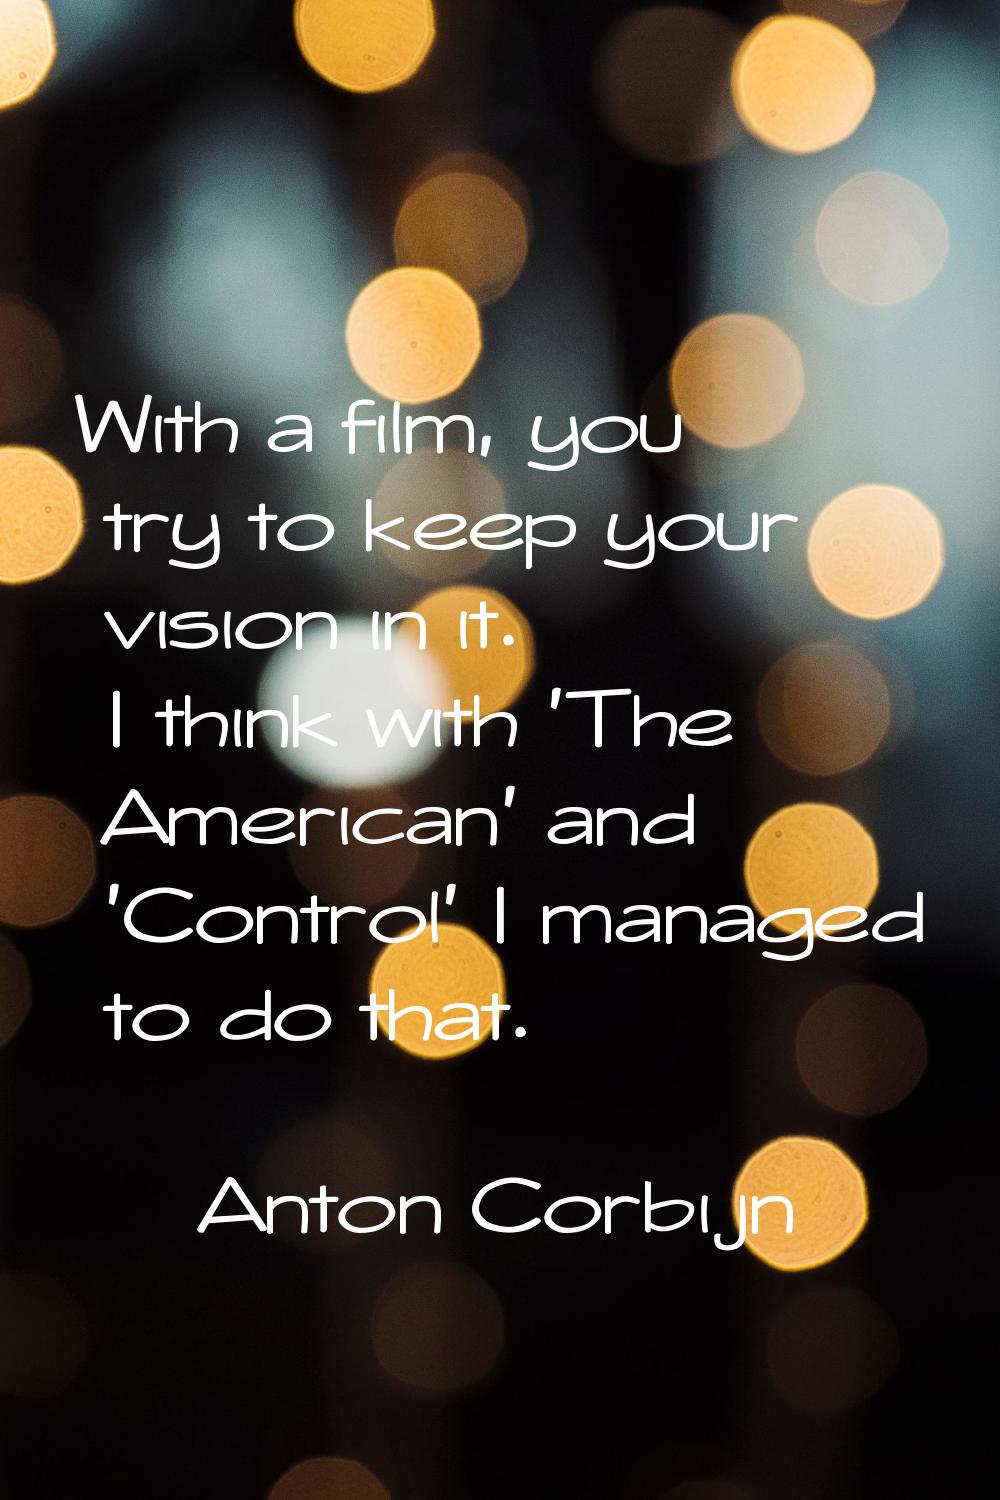 With a film, you try to keep your vision in it. I think with 'The American' and 'Control' I managed